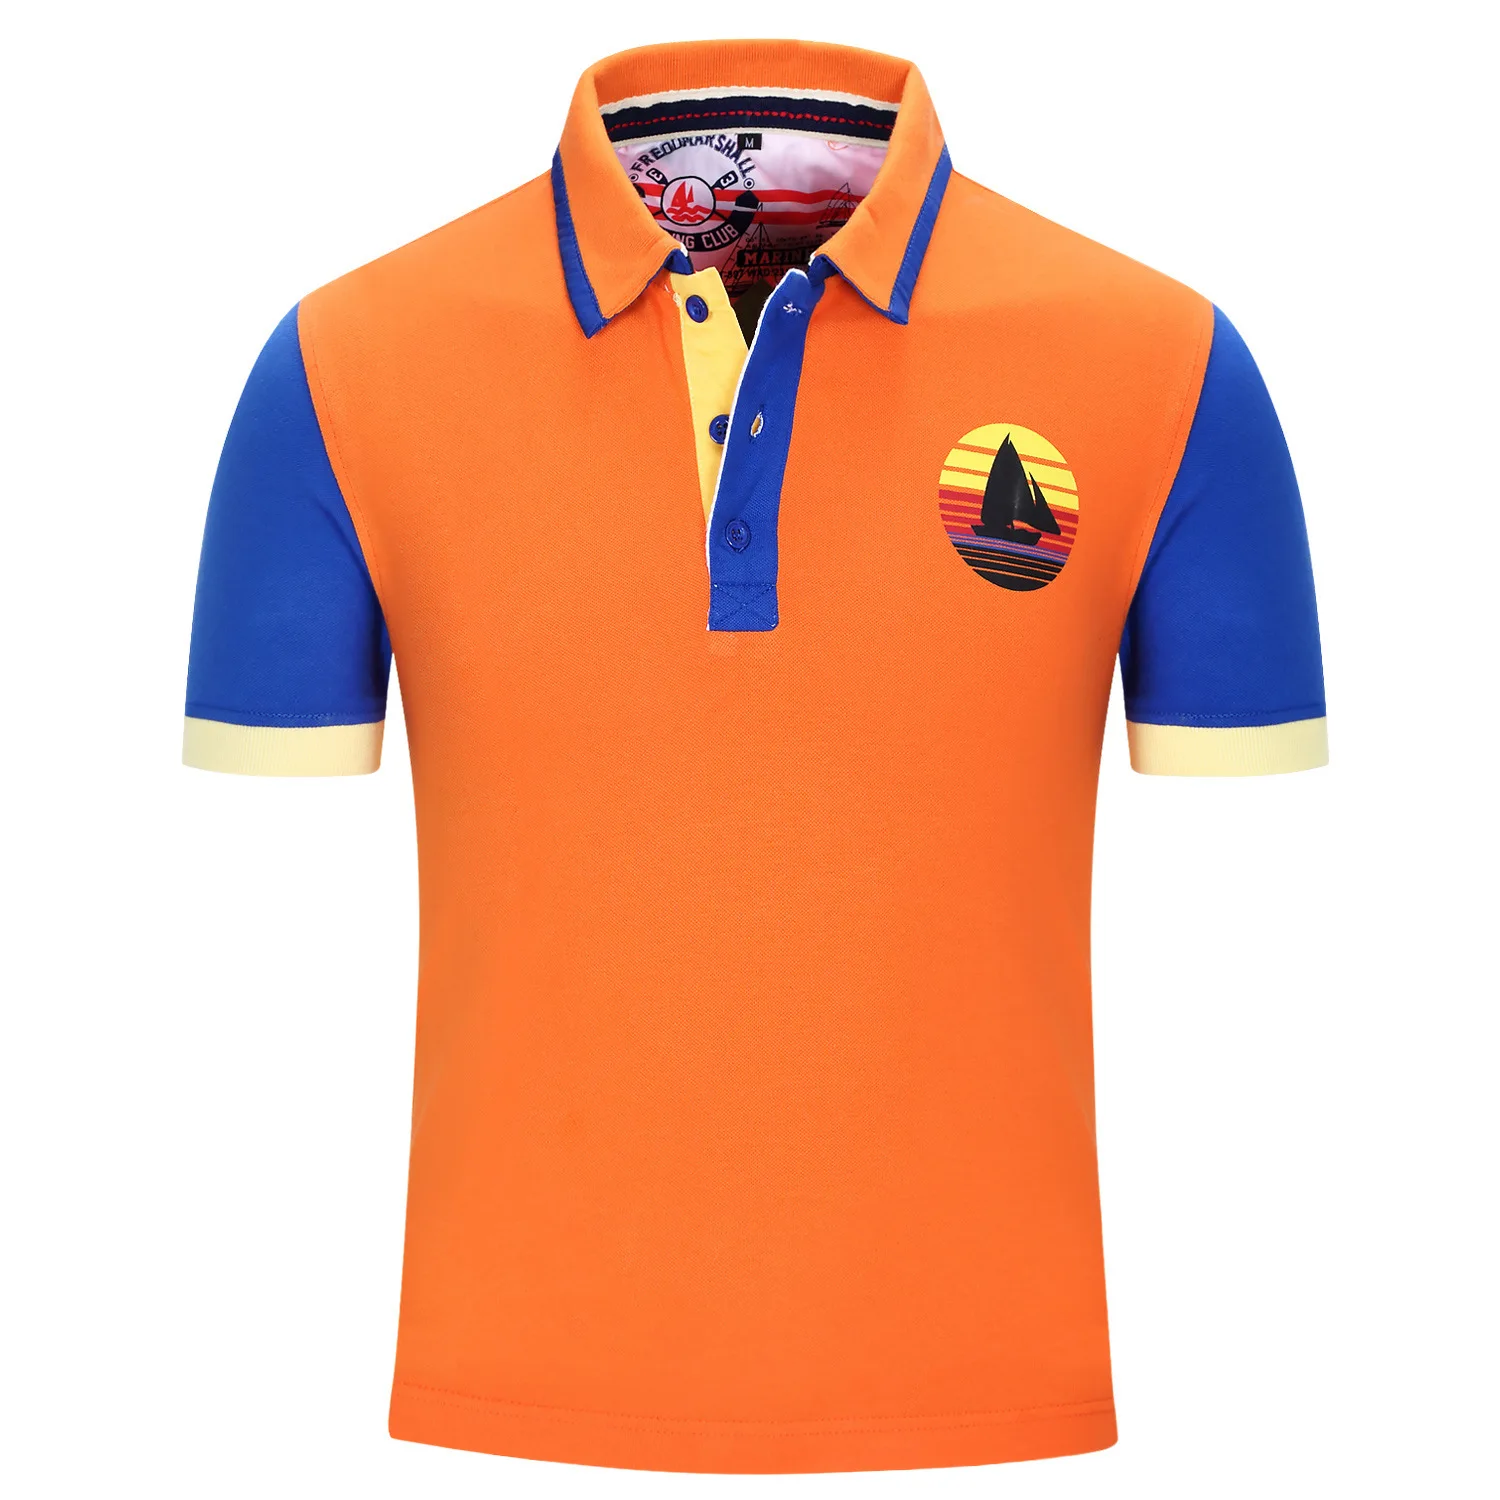 Fredd Marshall Herre Polo Shirt Fashion Herre Solid Polo Casual Toppe for at Man Patchwork Bomuld Plus Size Orange Gul Blå N10